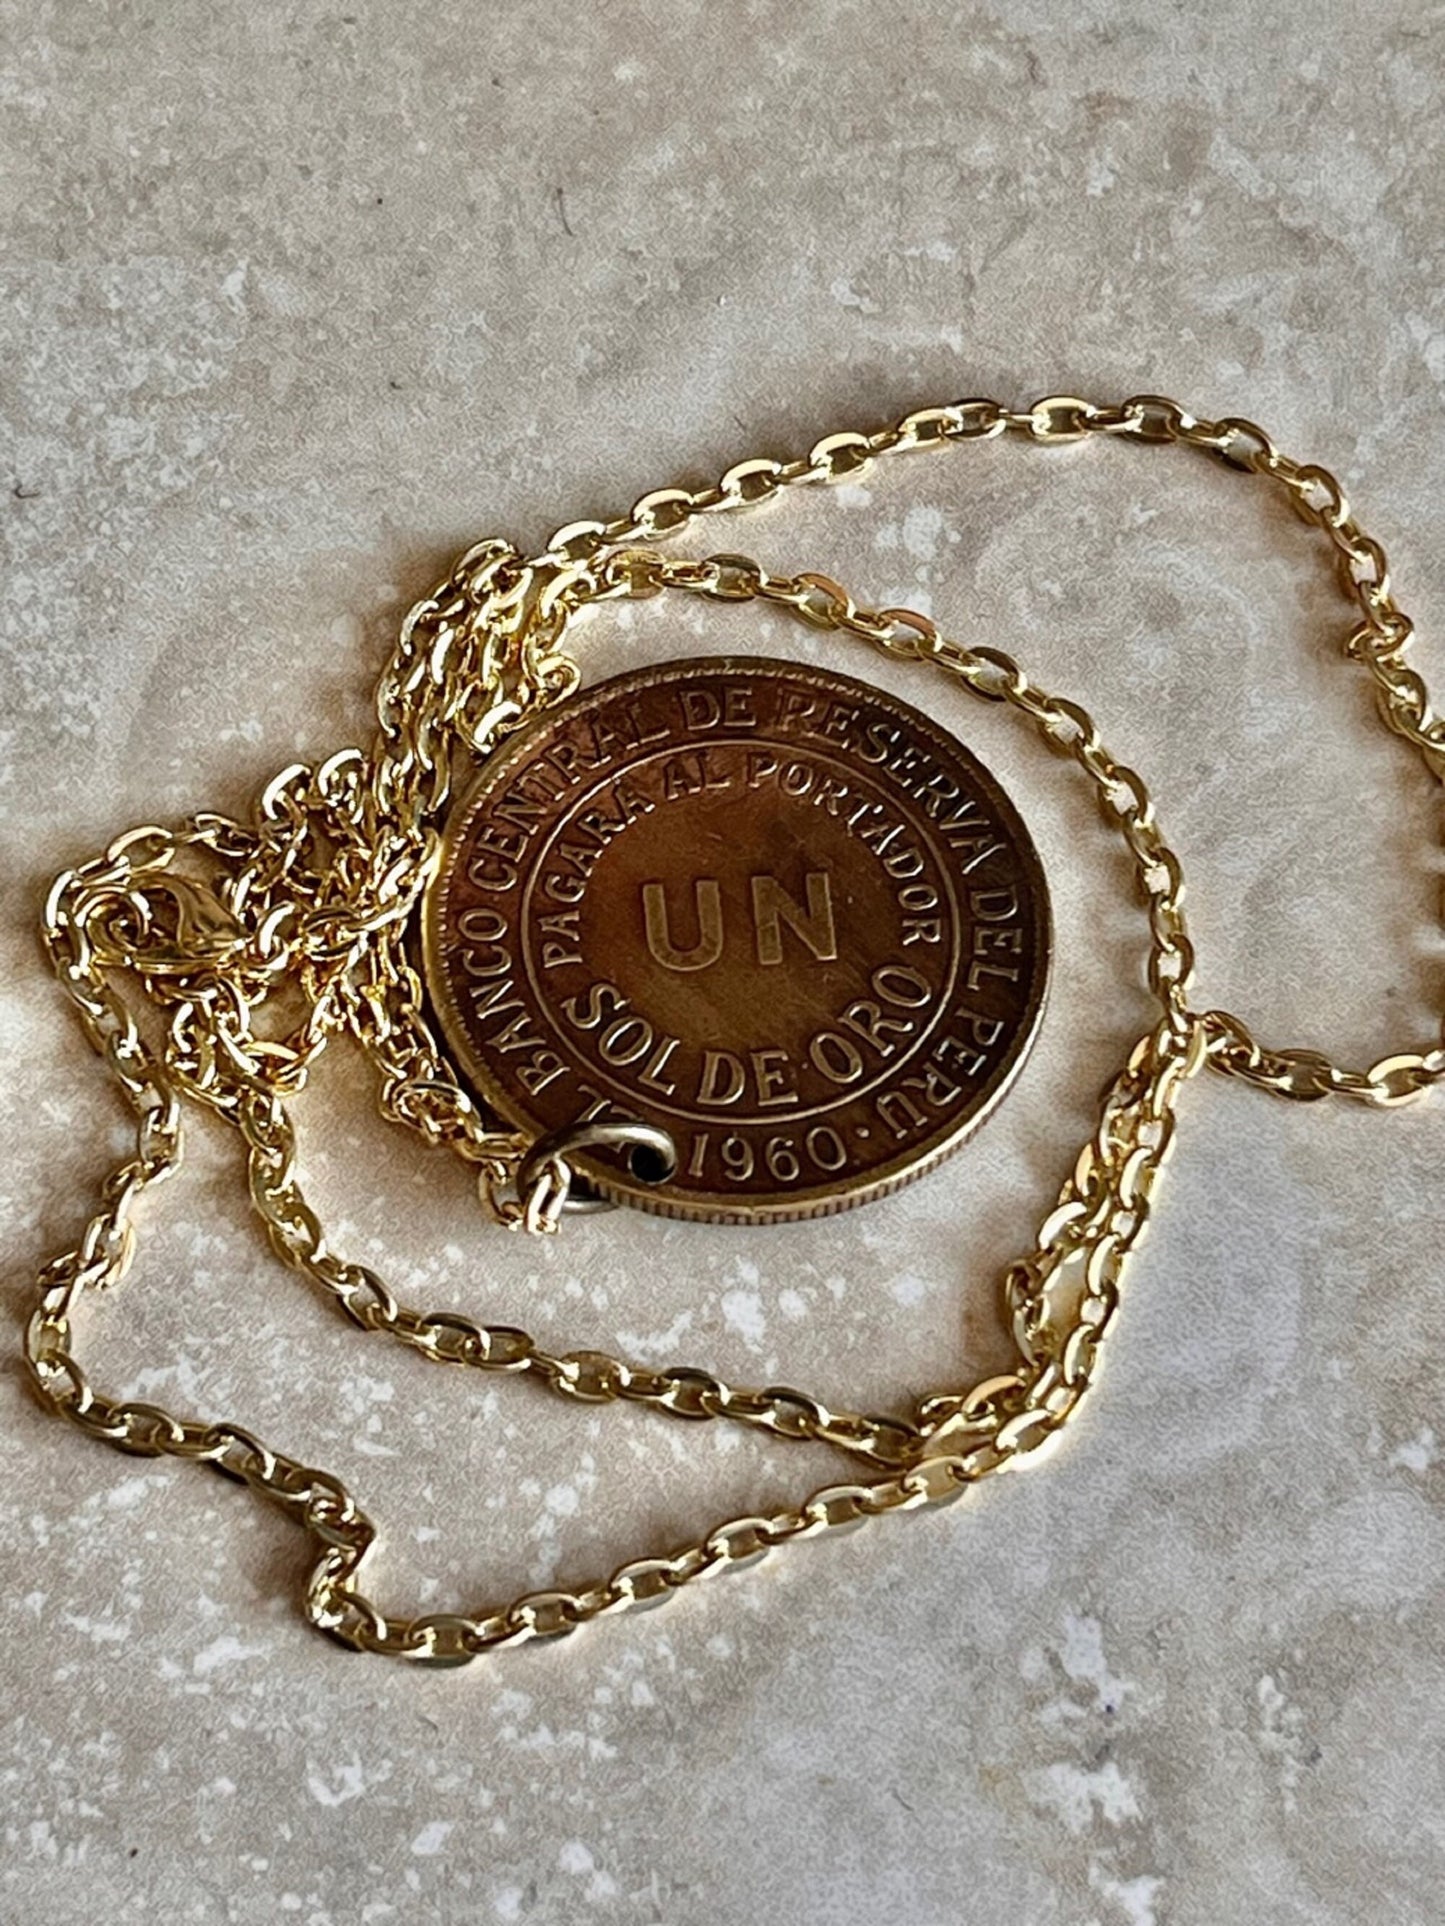 Peru Coin Pendant Peruvian UN SOL De Oro Personal Necklace Old Vintage Handmade Jewelry Gift Friend Charm For Him Her World Coin Collector